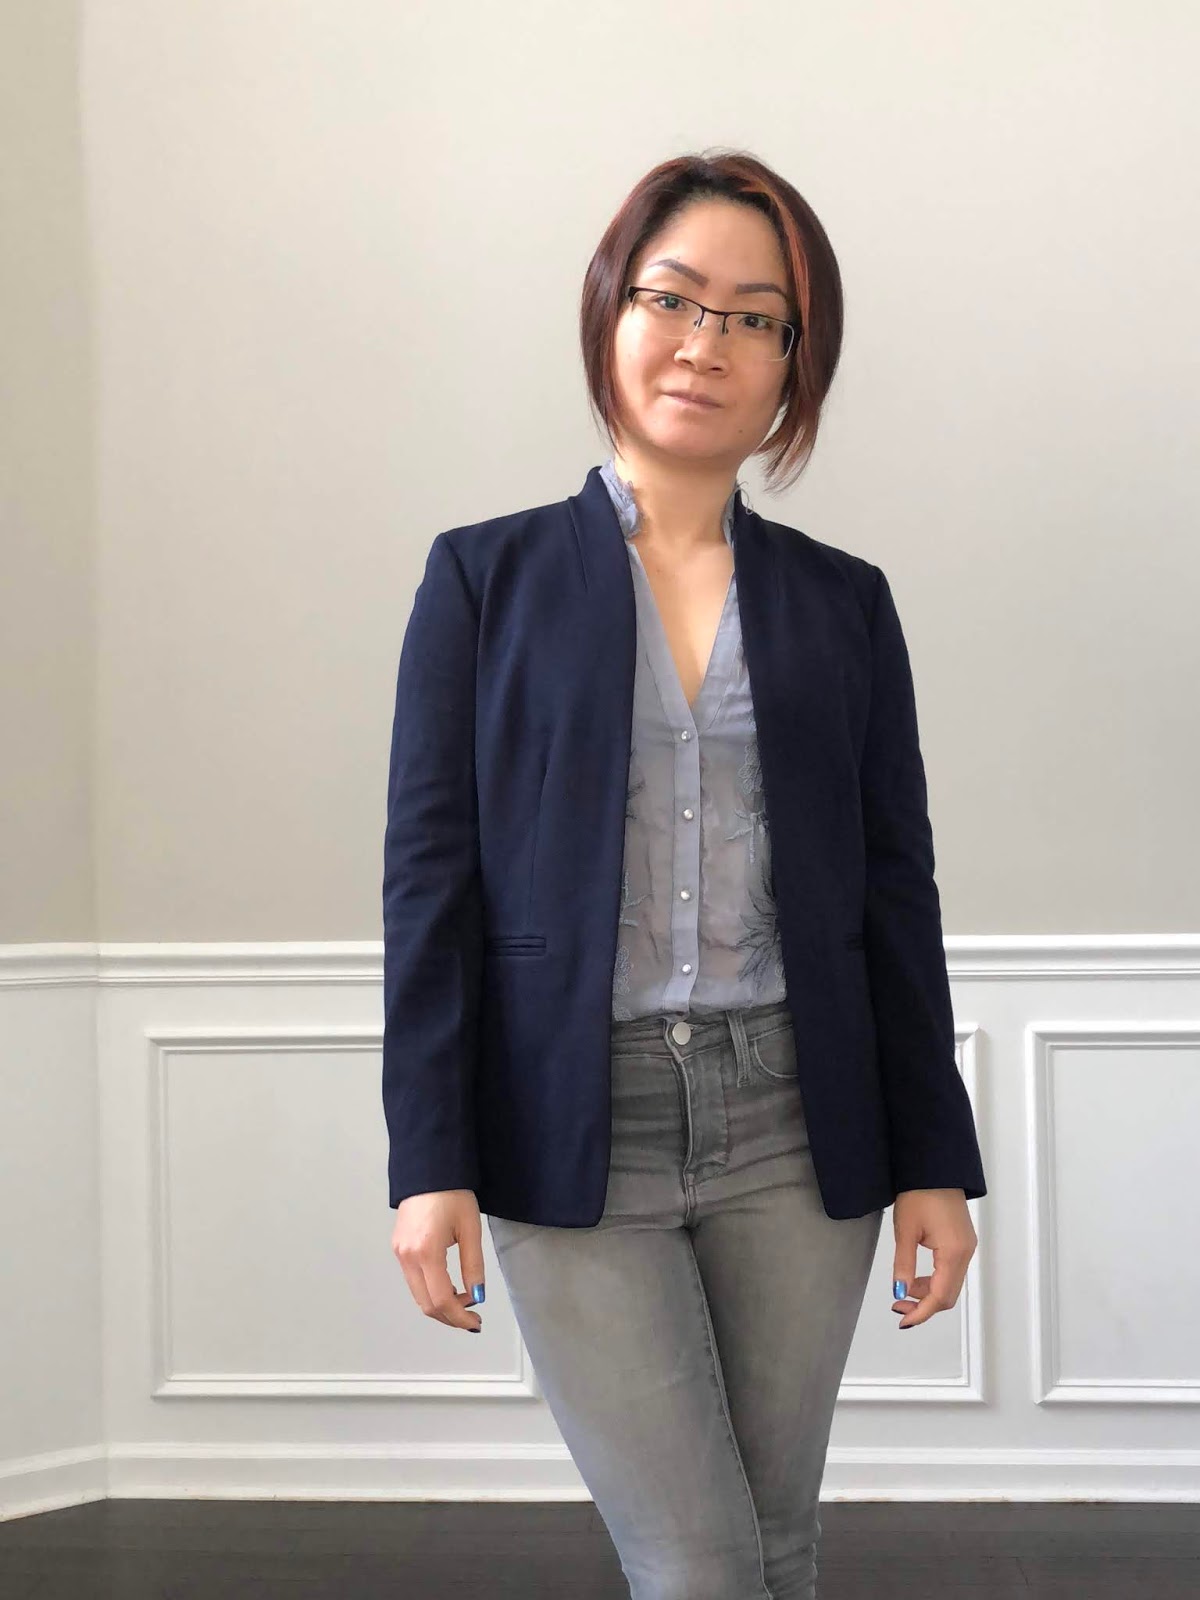 Petite Work Pants and Office Wear//Banana Republic Sloan Pants Slim Ankle  Review// Gingham, Camel and Navy